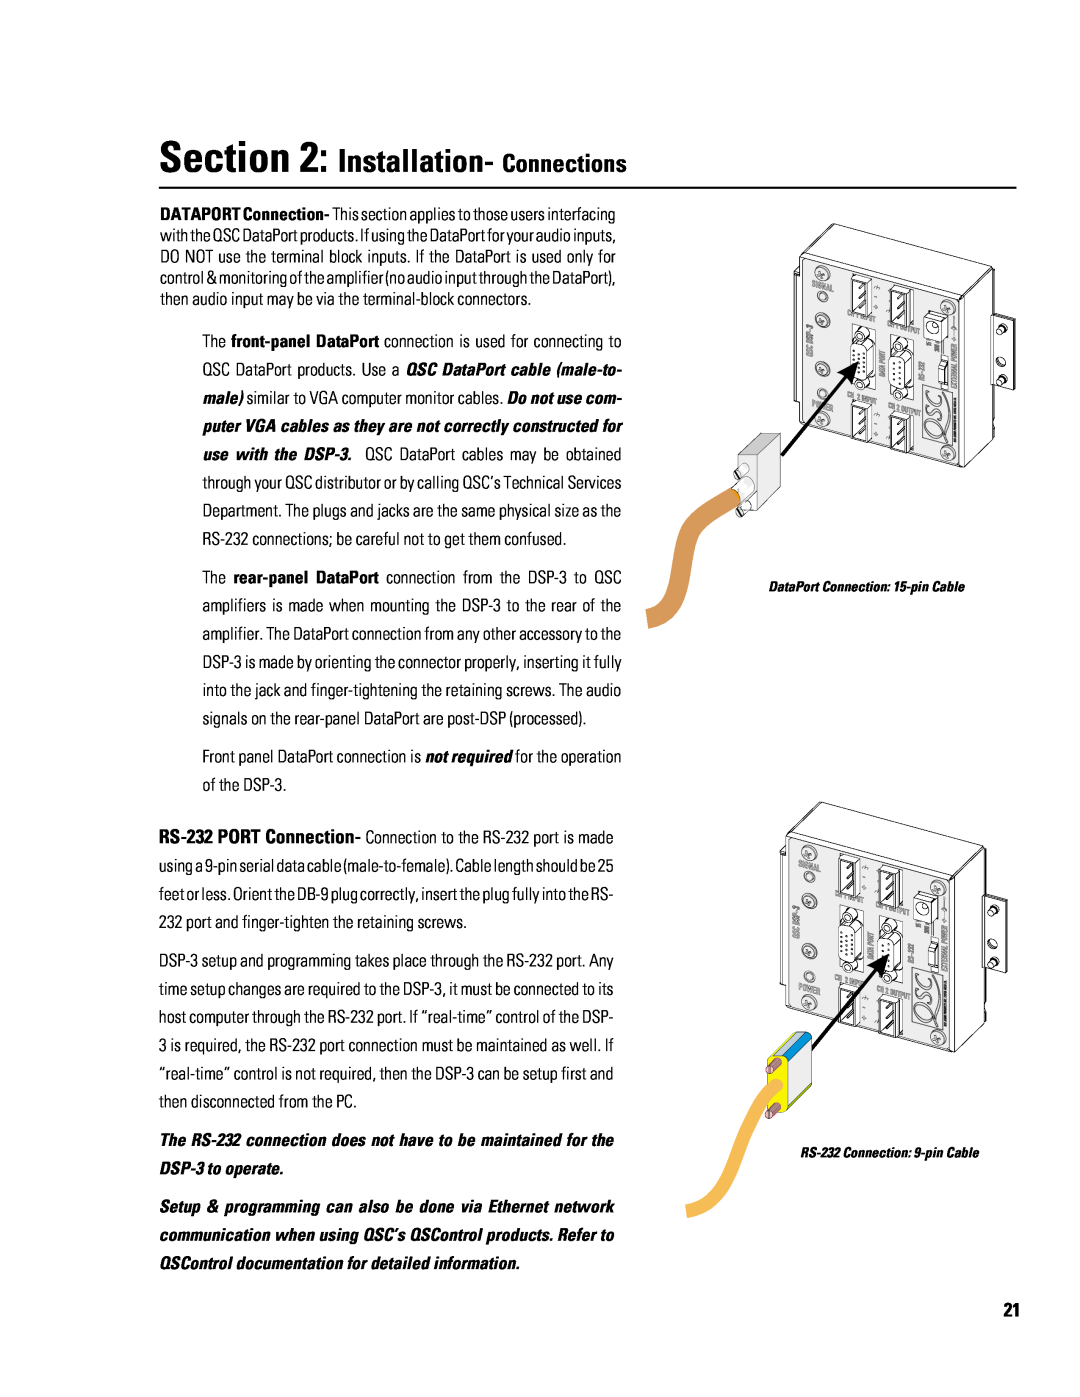 QSC Audio DSP-3 manual Installation- Connections, The front-panel DataPort connection is used for connecting to 